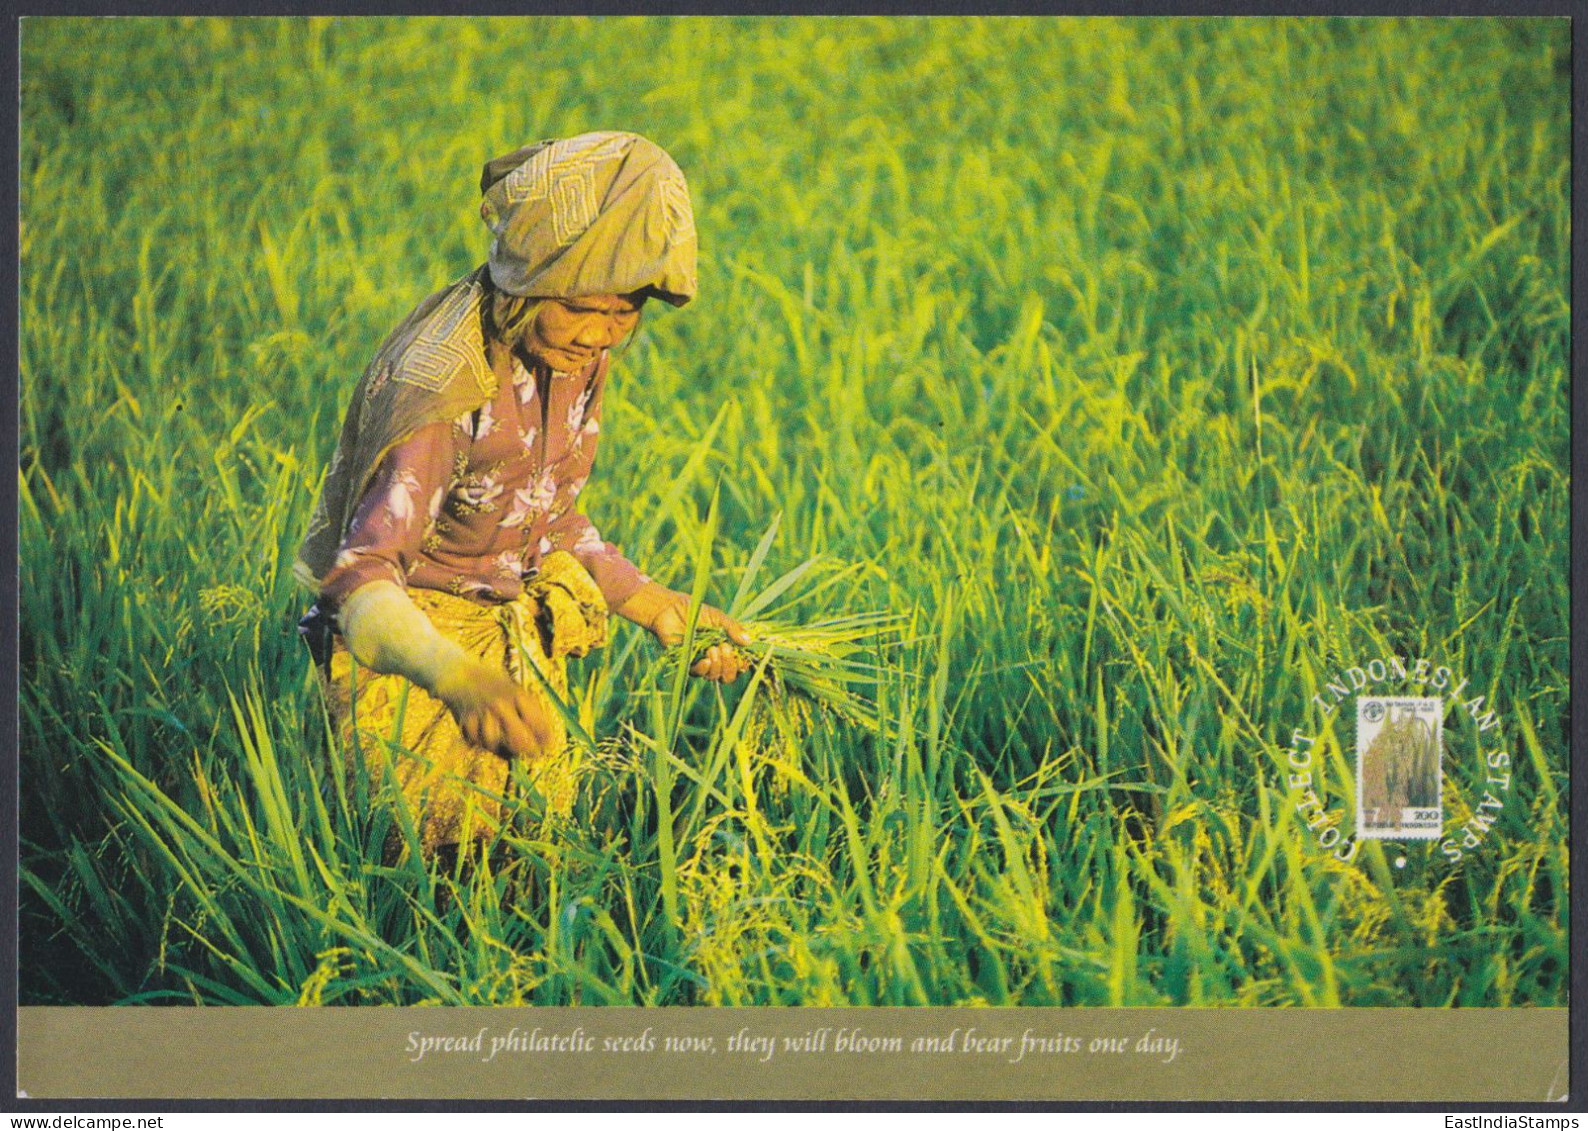 Indonesia 2000 Mint Postcard Paddy Picking Sumedang, West Java, Rice, Farming, Farm, Agriculture, Farmer, Woman - Indonésie